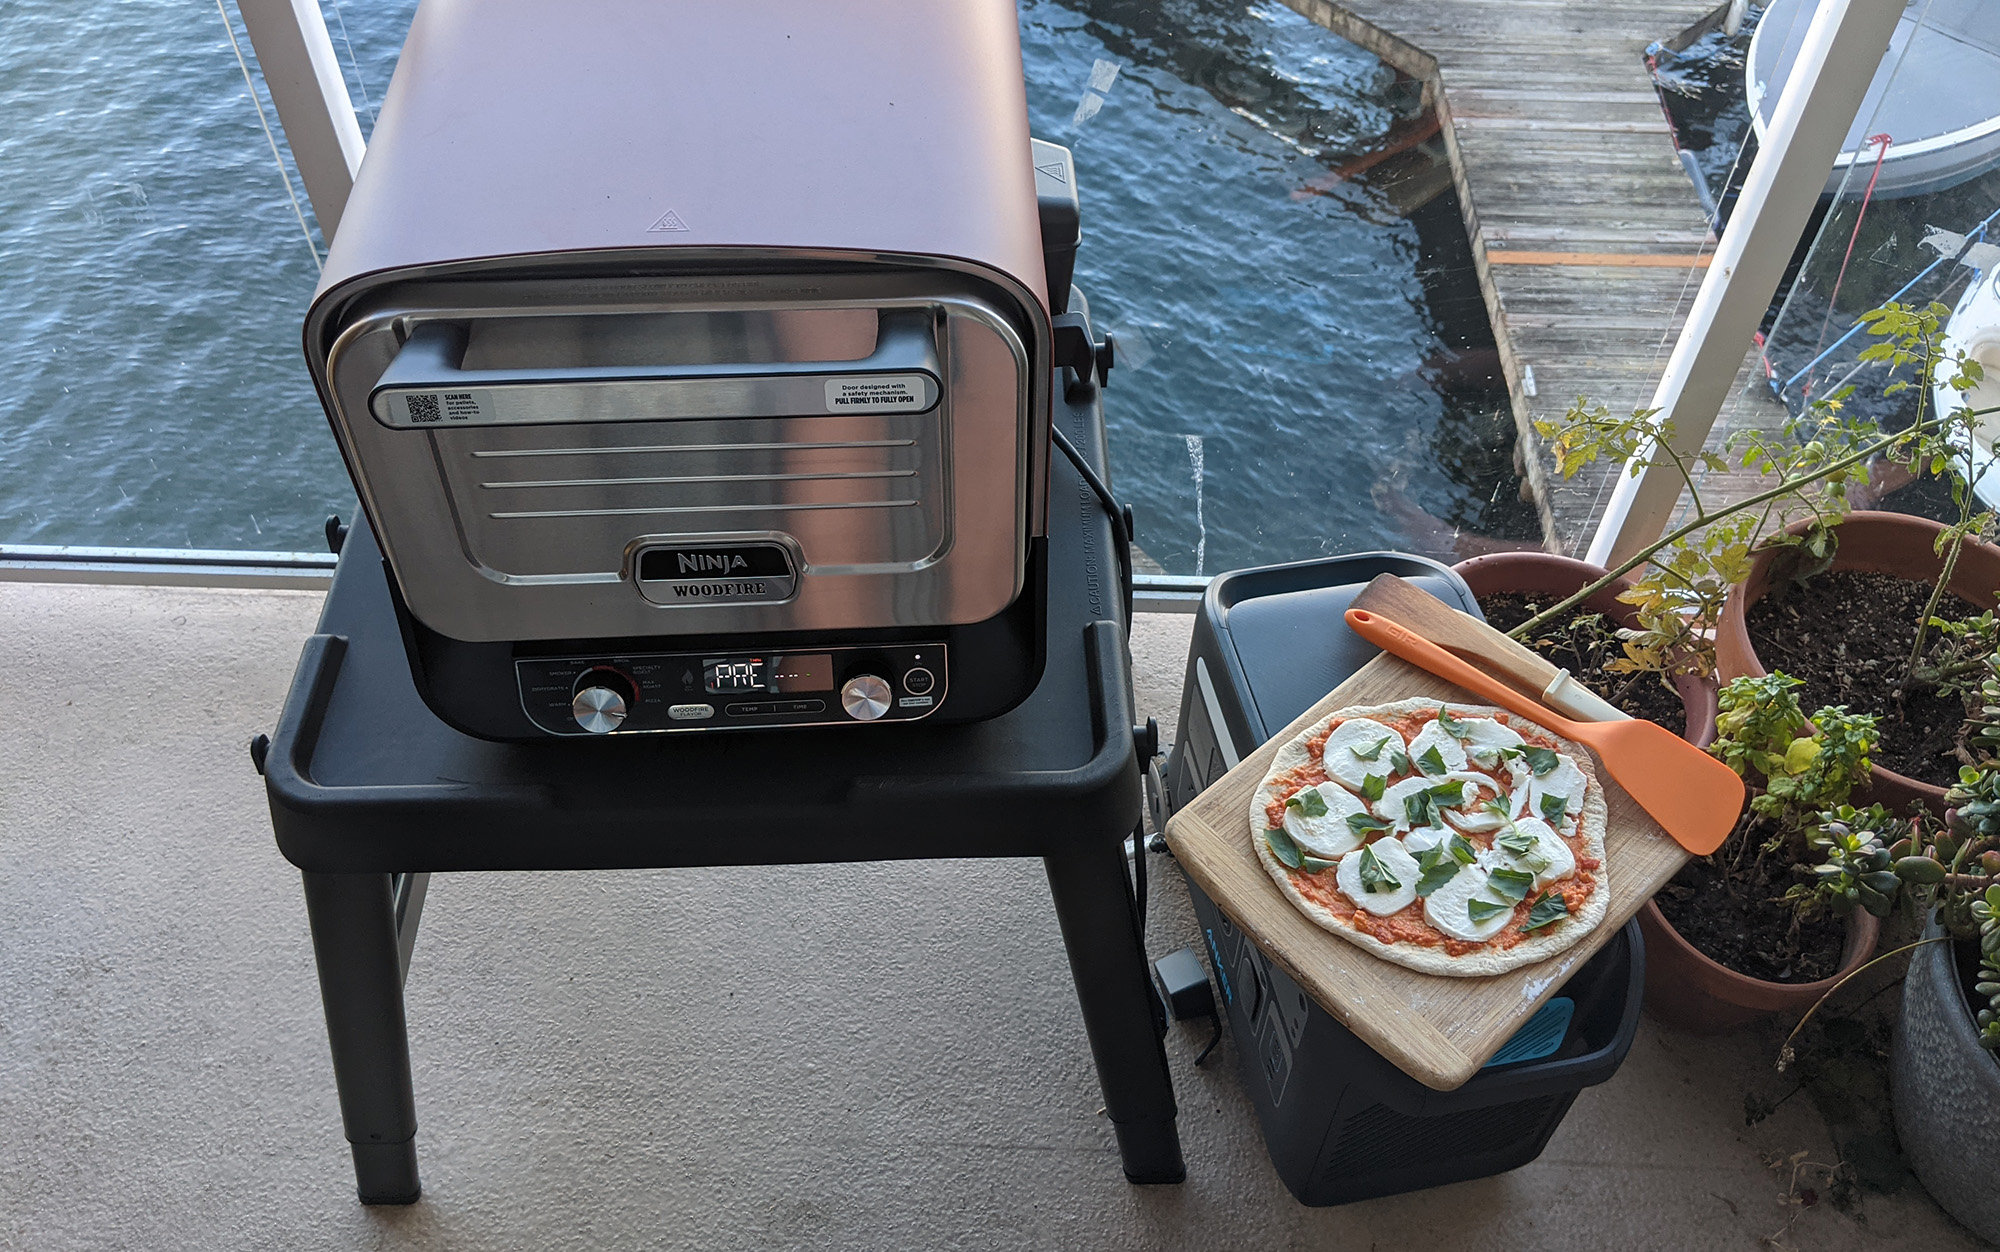 Ninja Woodfire Outdoor Oven Reviewed and Rated